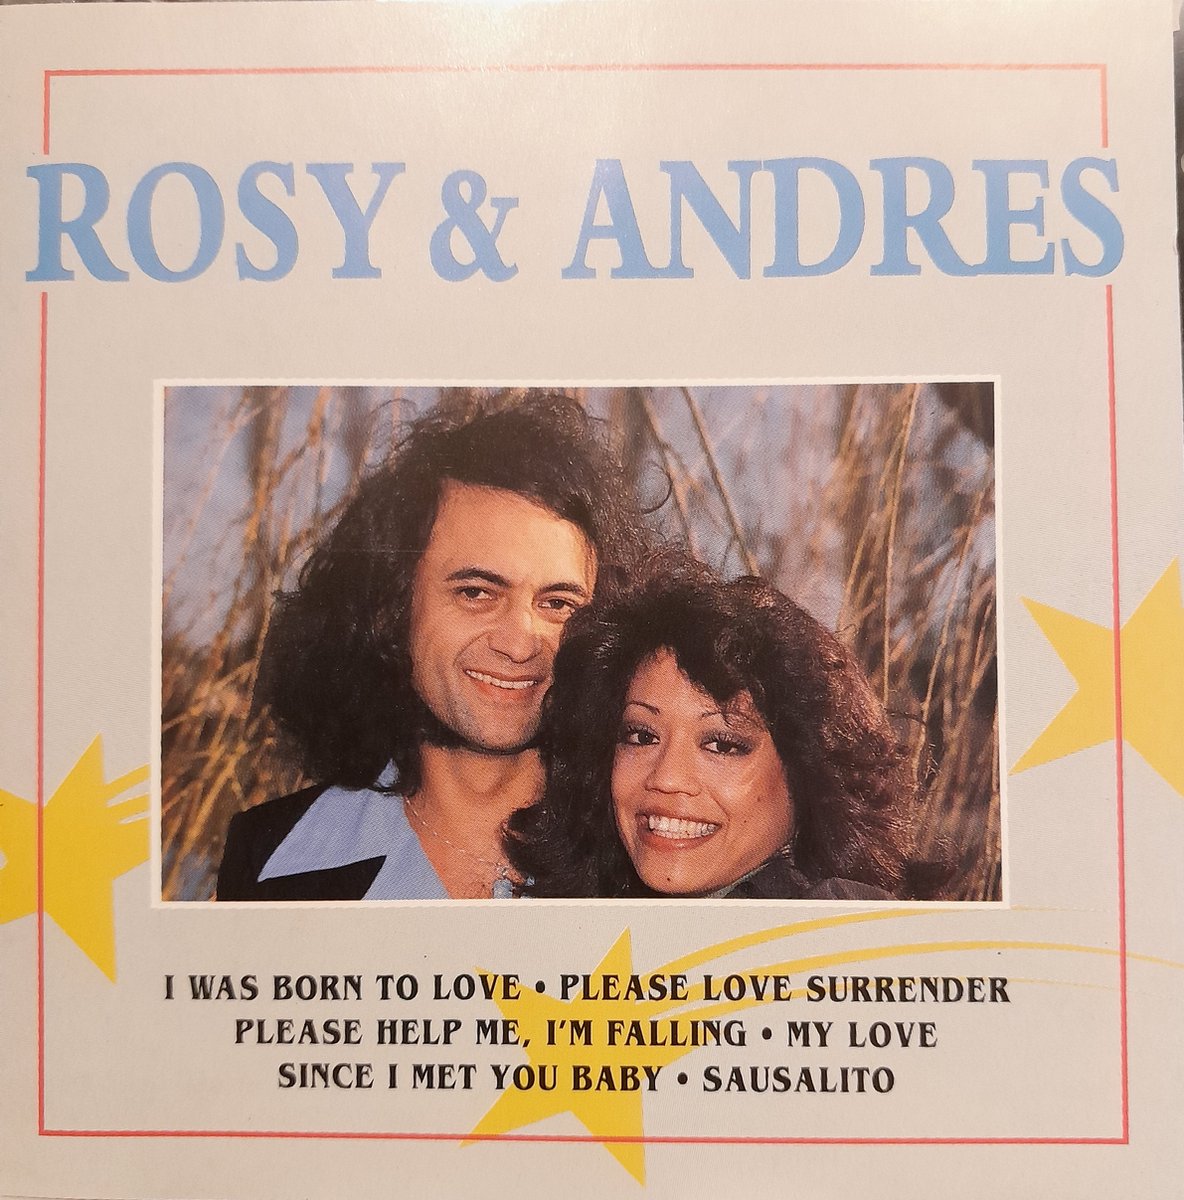 Rosy & Andres - Rosy & Andres